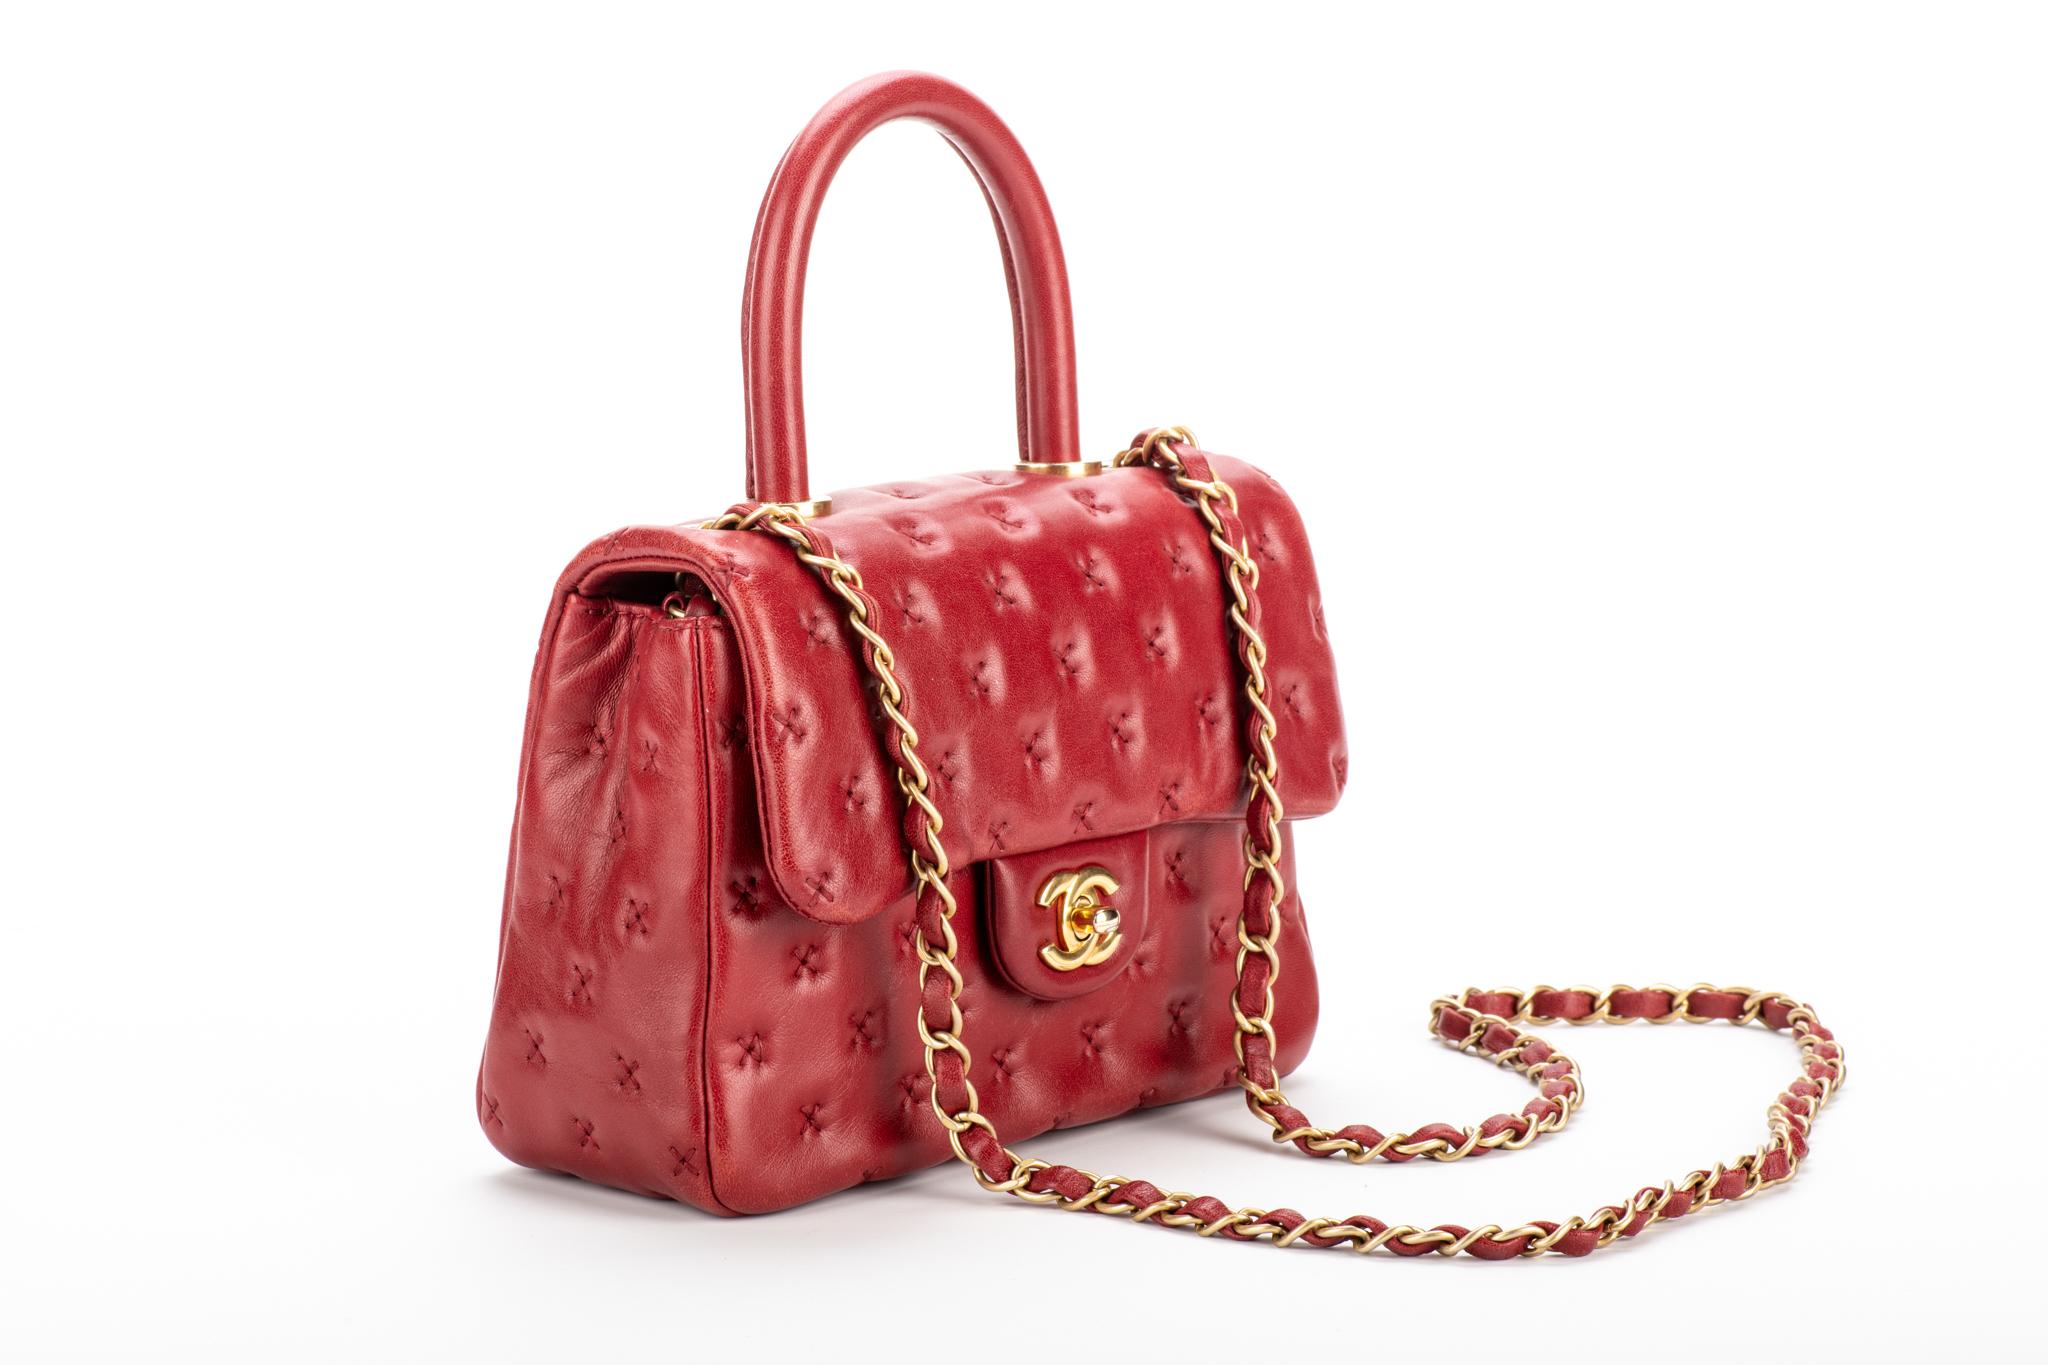 Chanel authentic super limited edition stitched red lambskin Coco Handle bag. Handle drop 4